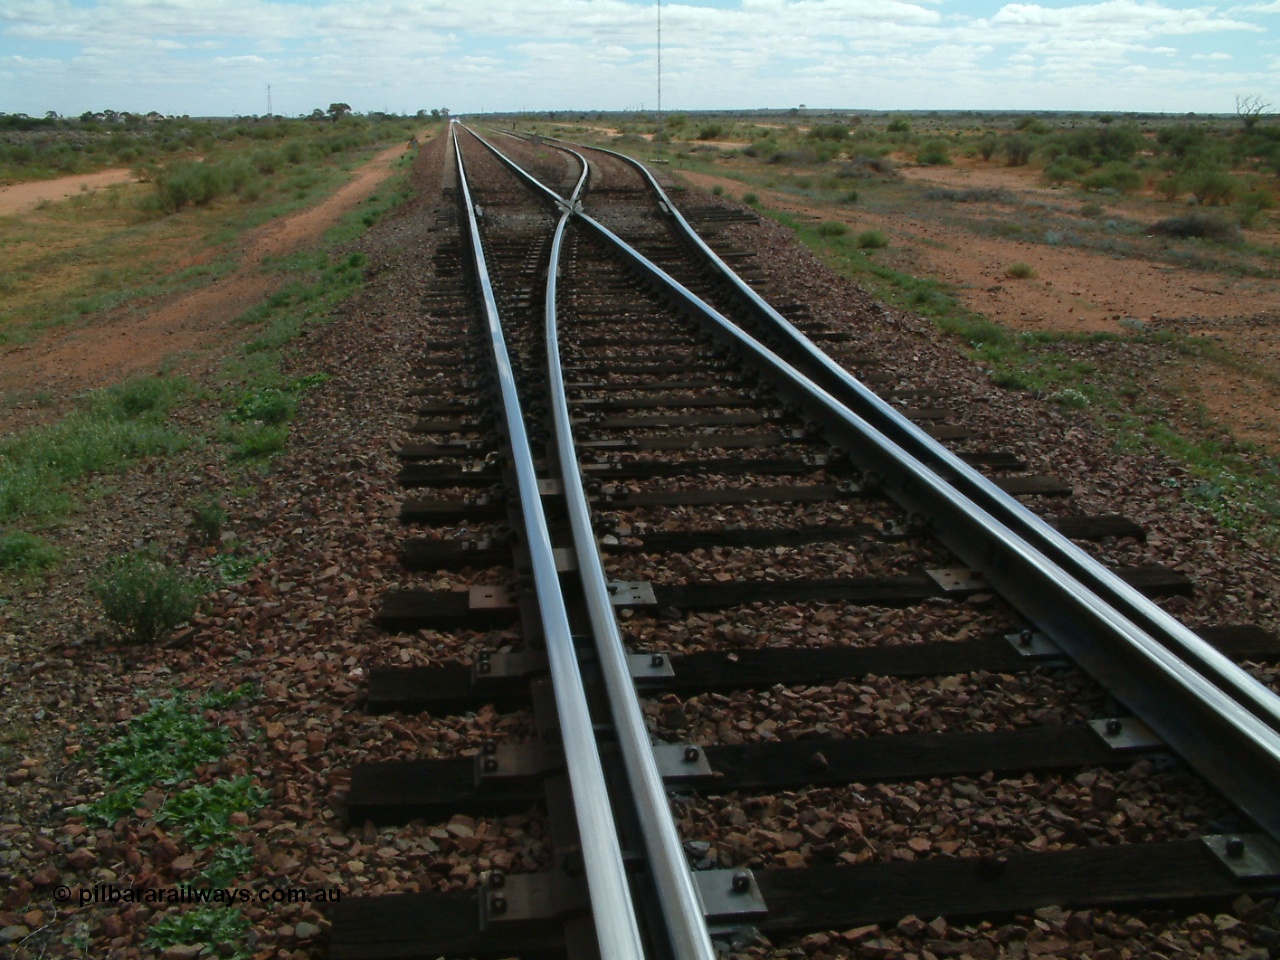 030415 135552
Kingoonya, located at the 426.5 km on the Trans Australian Railway, looking west at the timber section that carries the points or turnout and the concrete sleepers can be seen starting again. [url=https://goo.gl/maps/7TMcikXj33EqWvyCA]GeoData location[/url].
